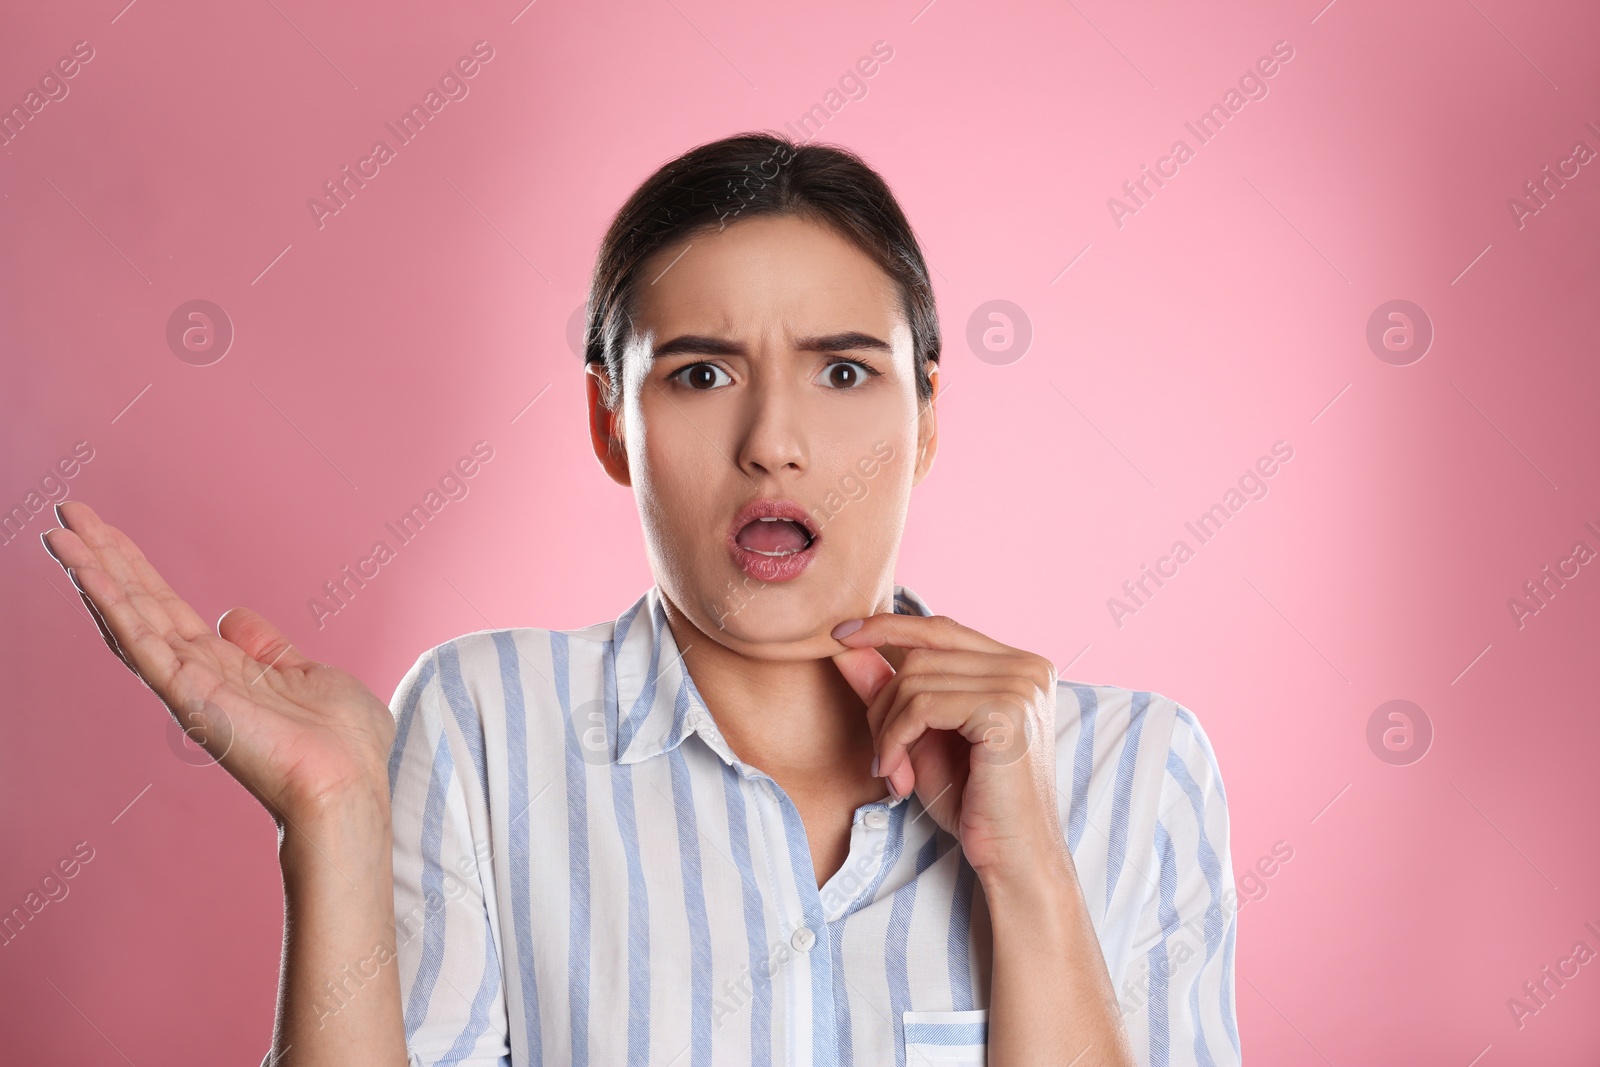 Photo of Emotional young woman with double chin on pink background